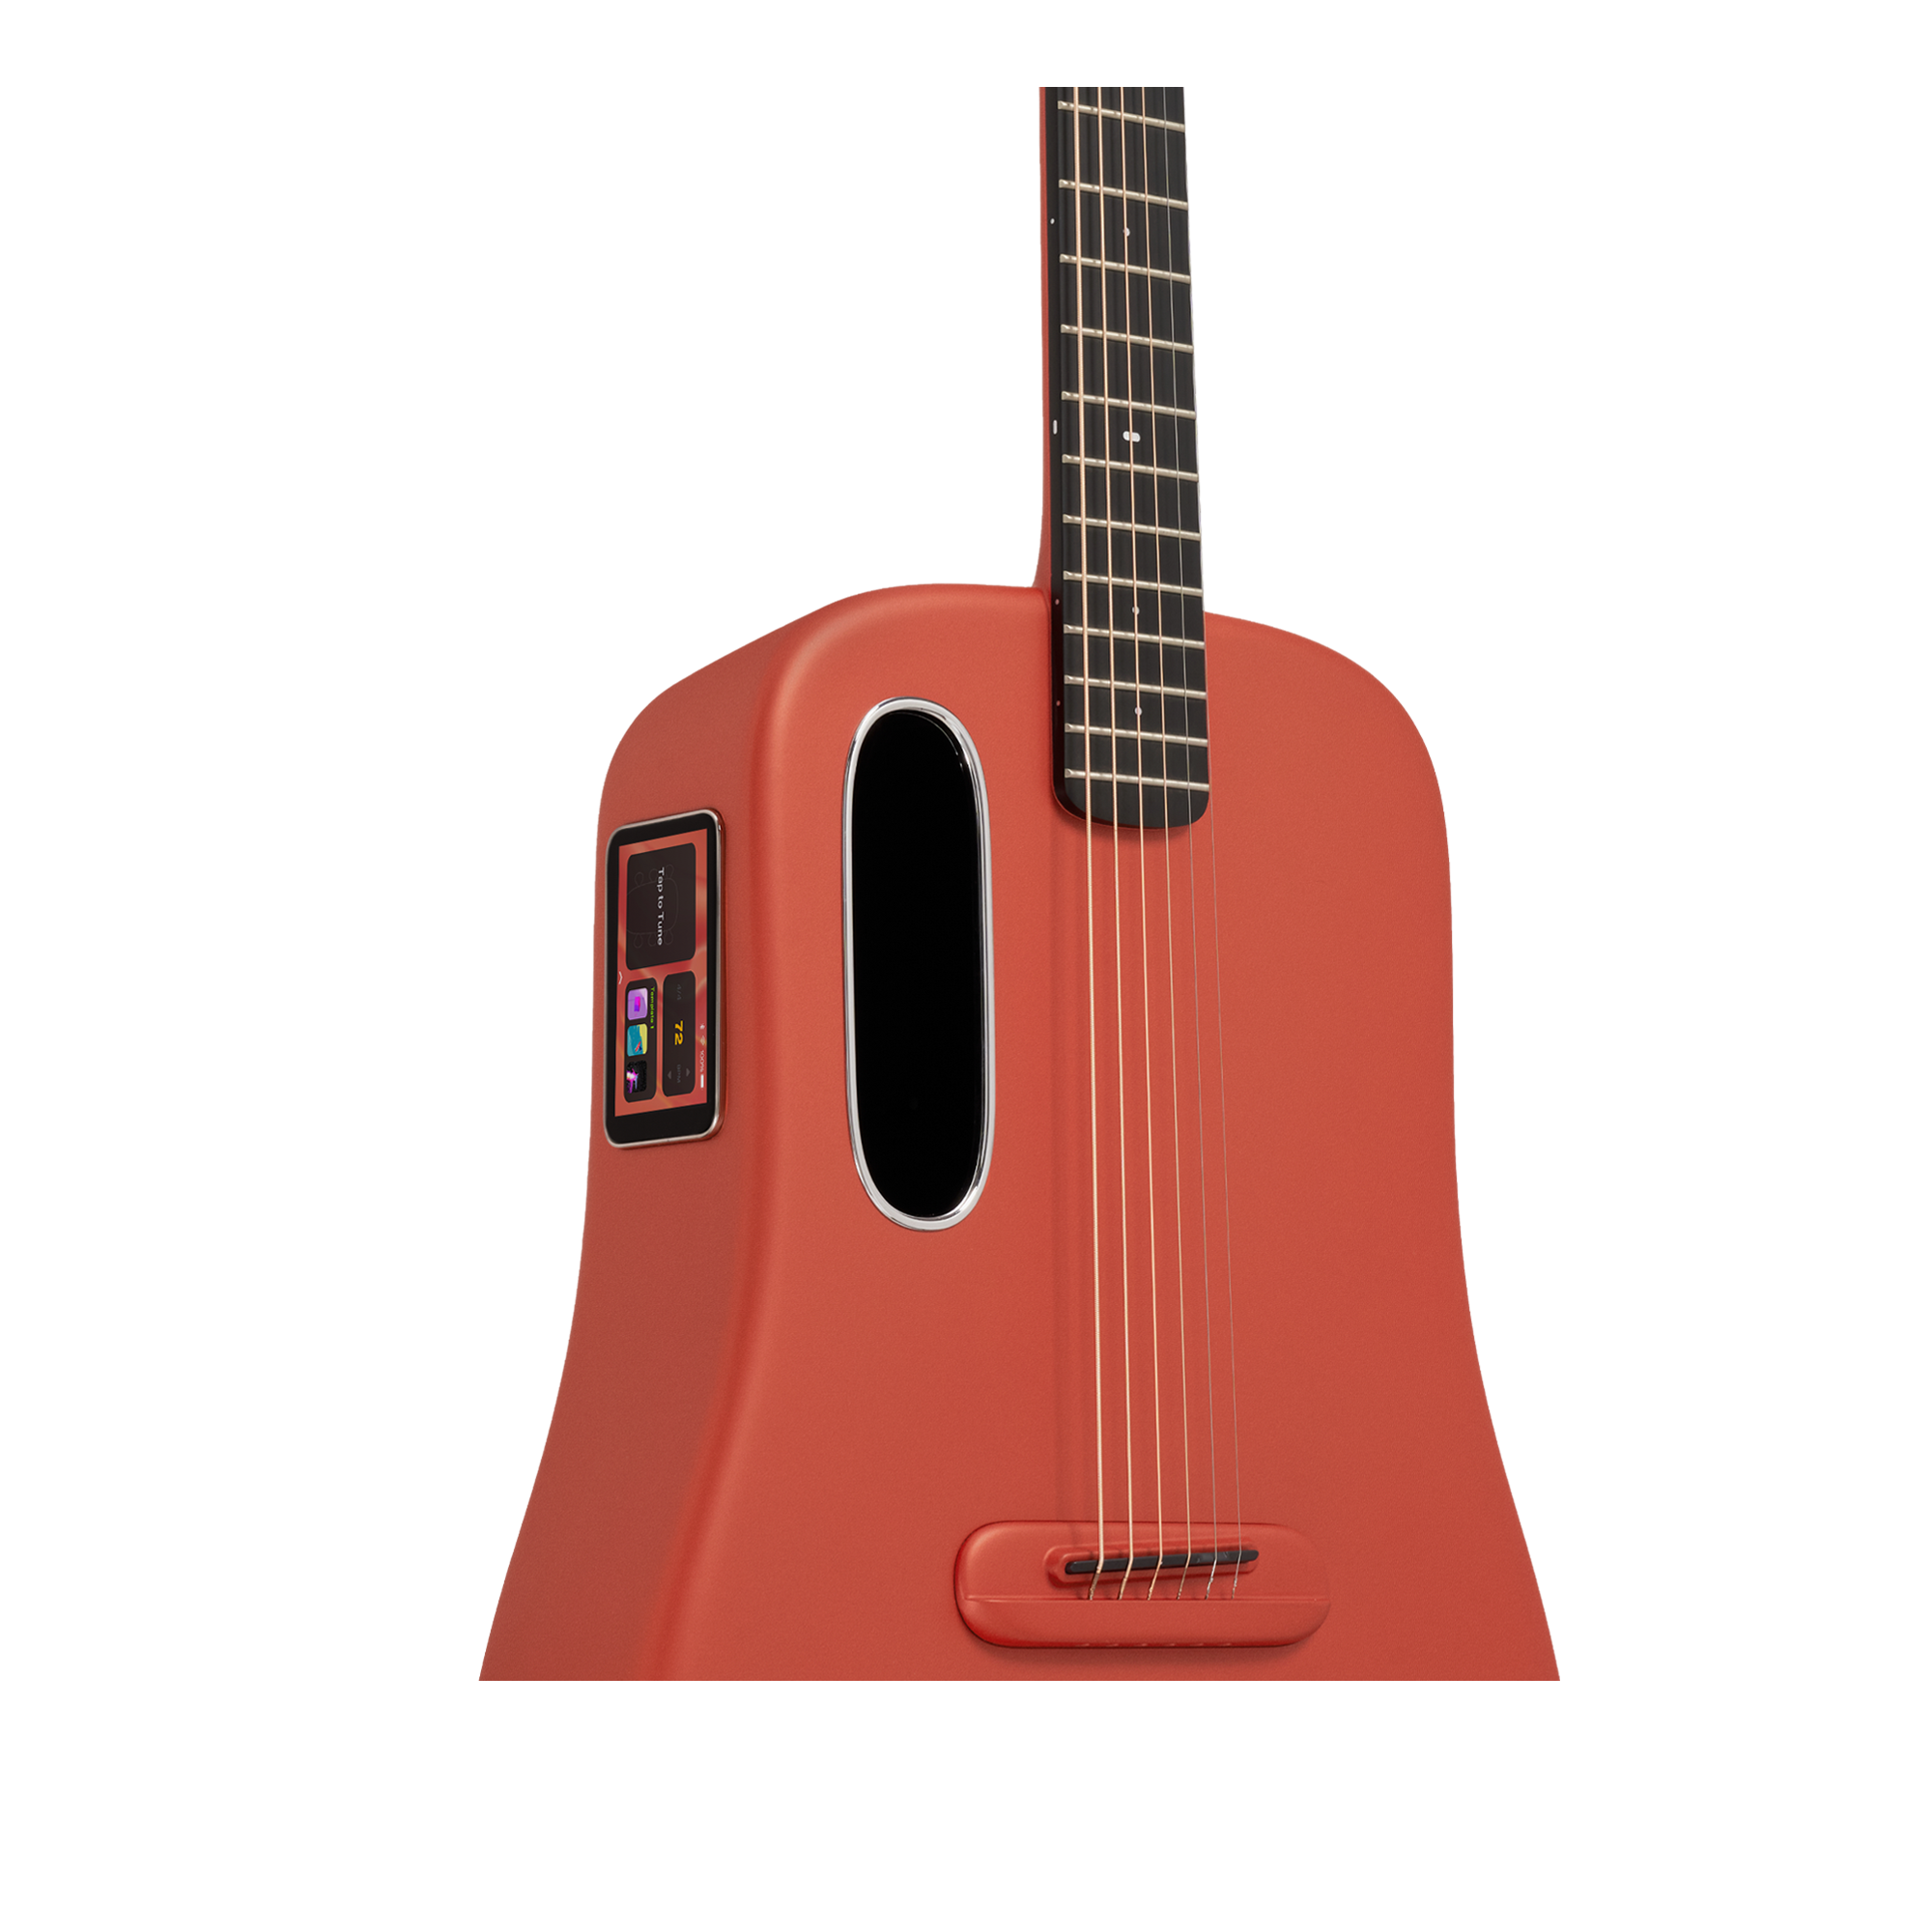 Lava Me 3 38inch Carbon Fiber Smart Guitar with Space Bag - Red